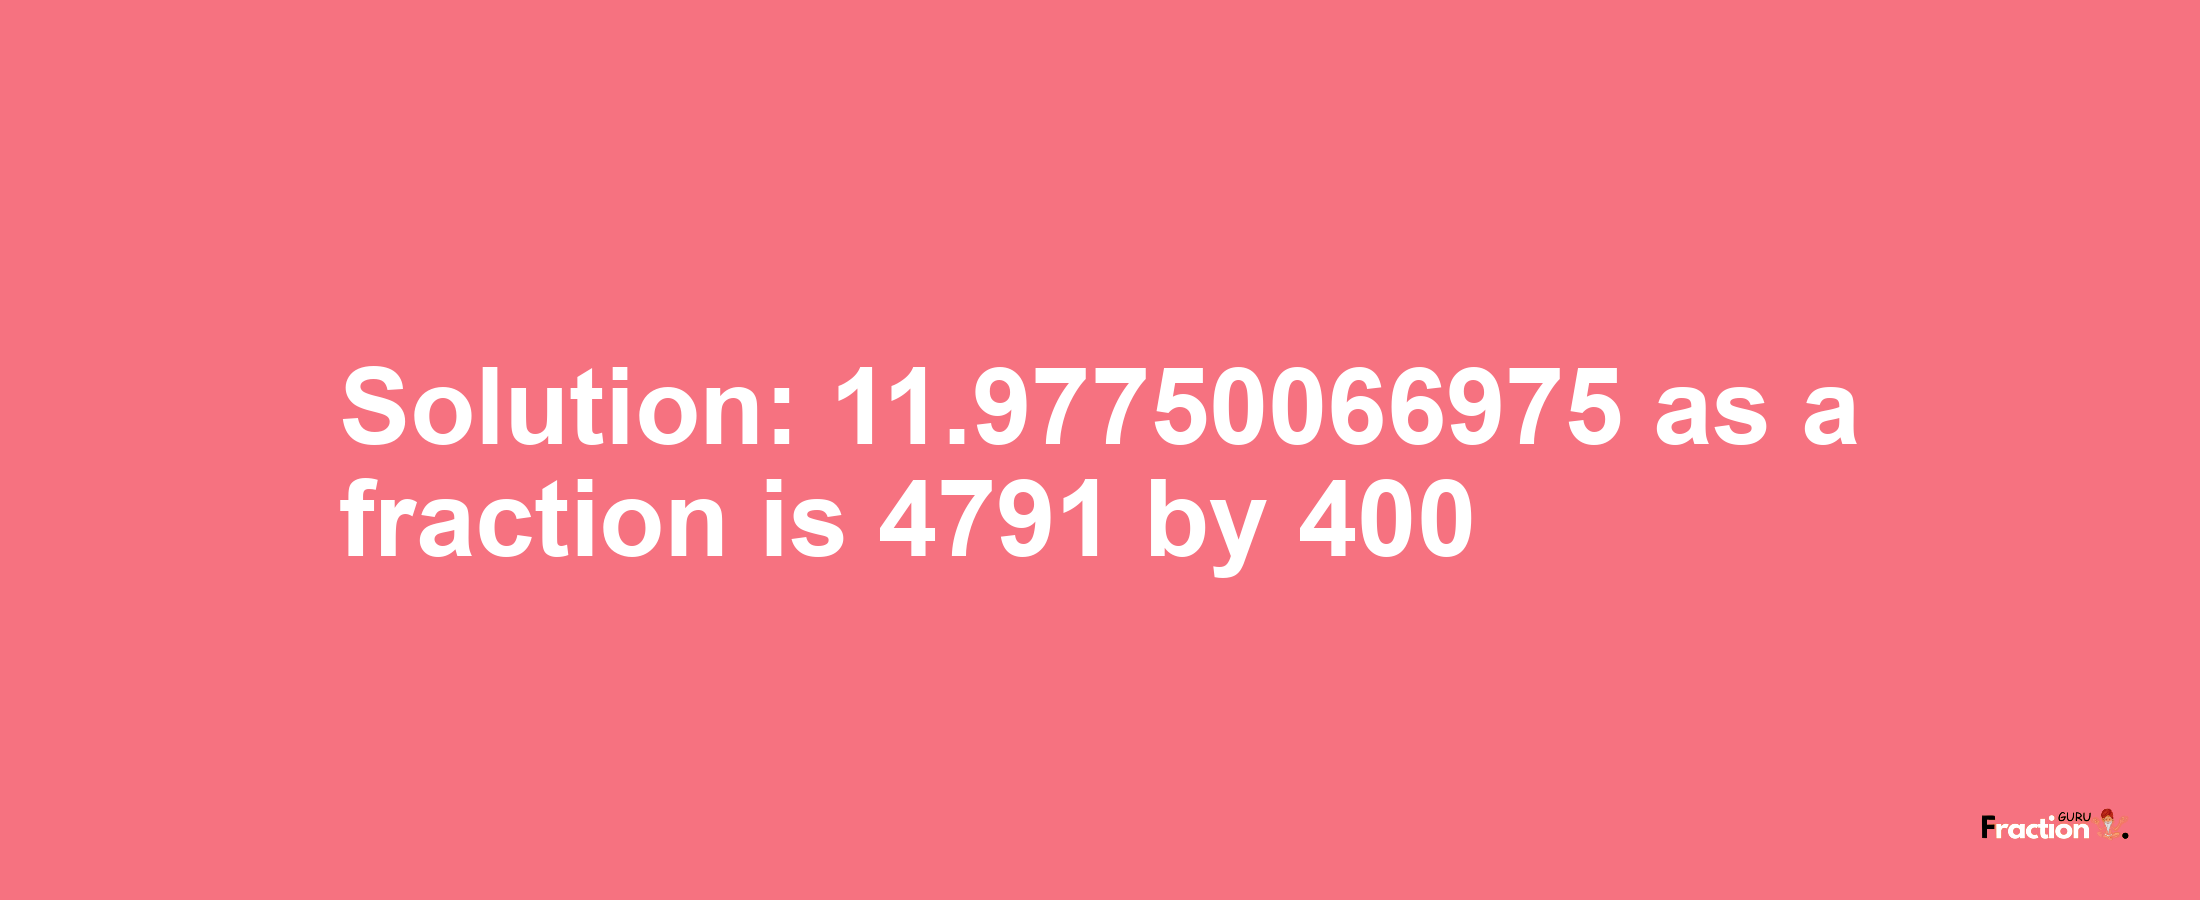 Solution:11.97750066975 as a fraction is 4791/400